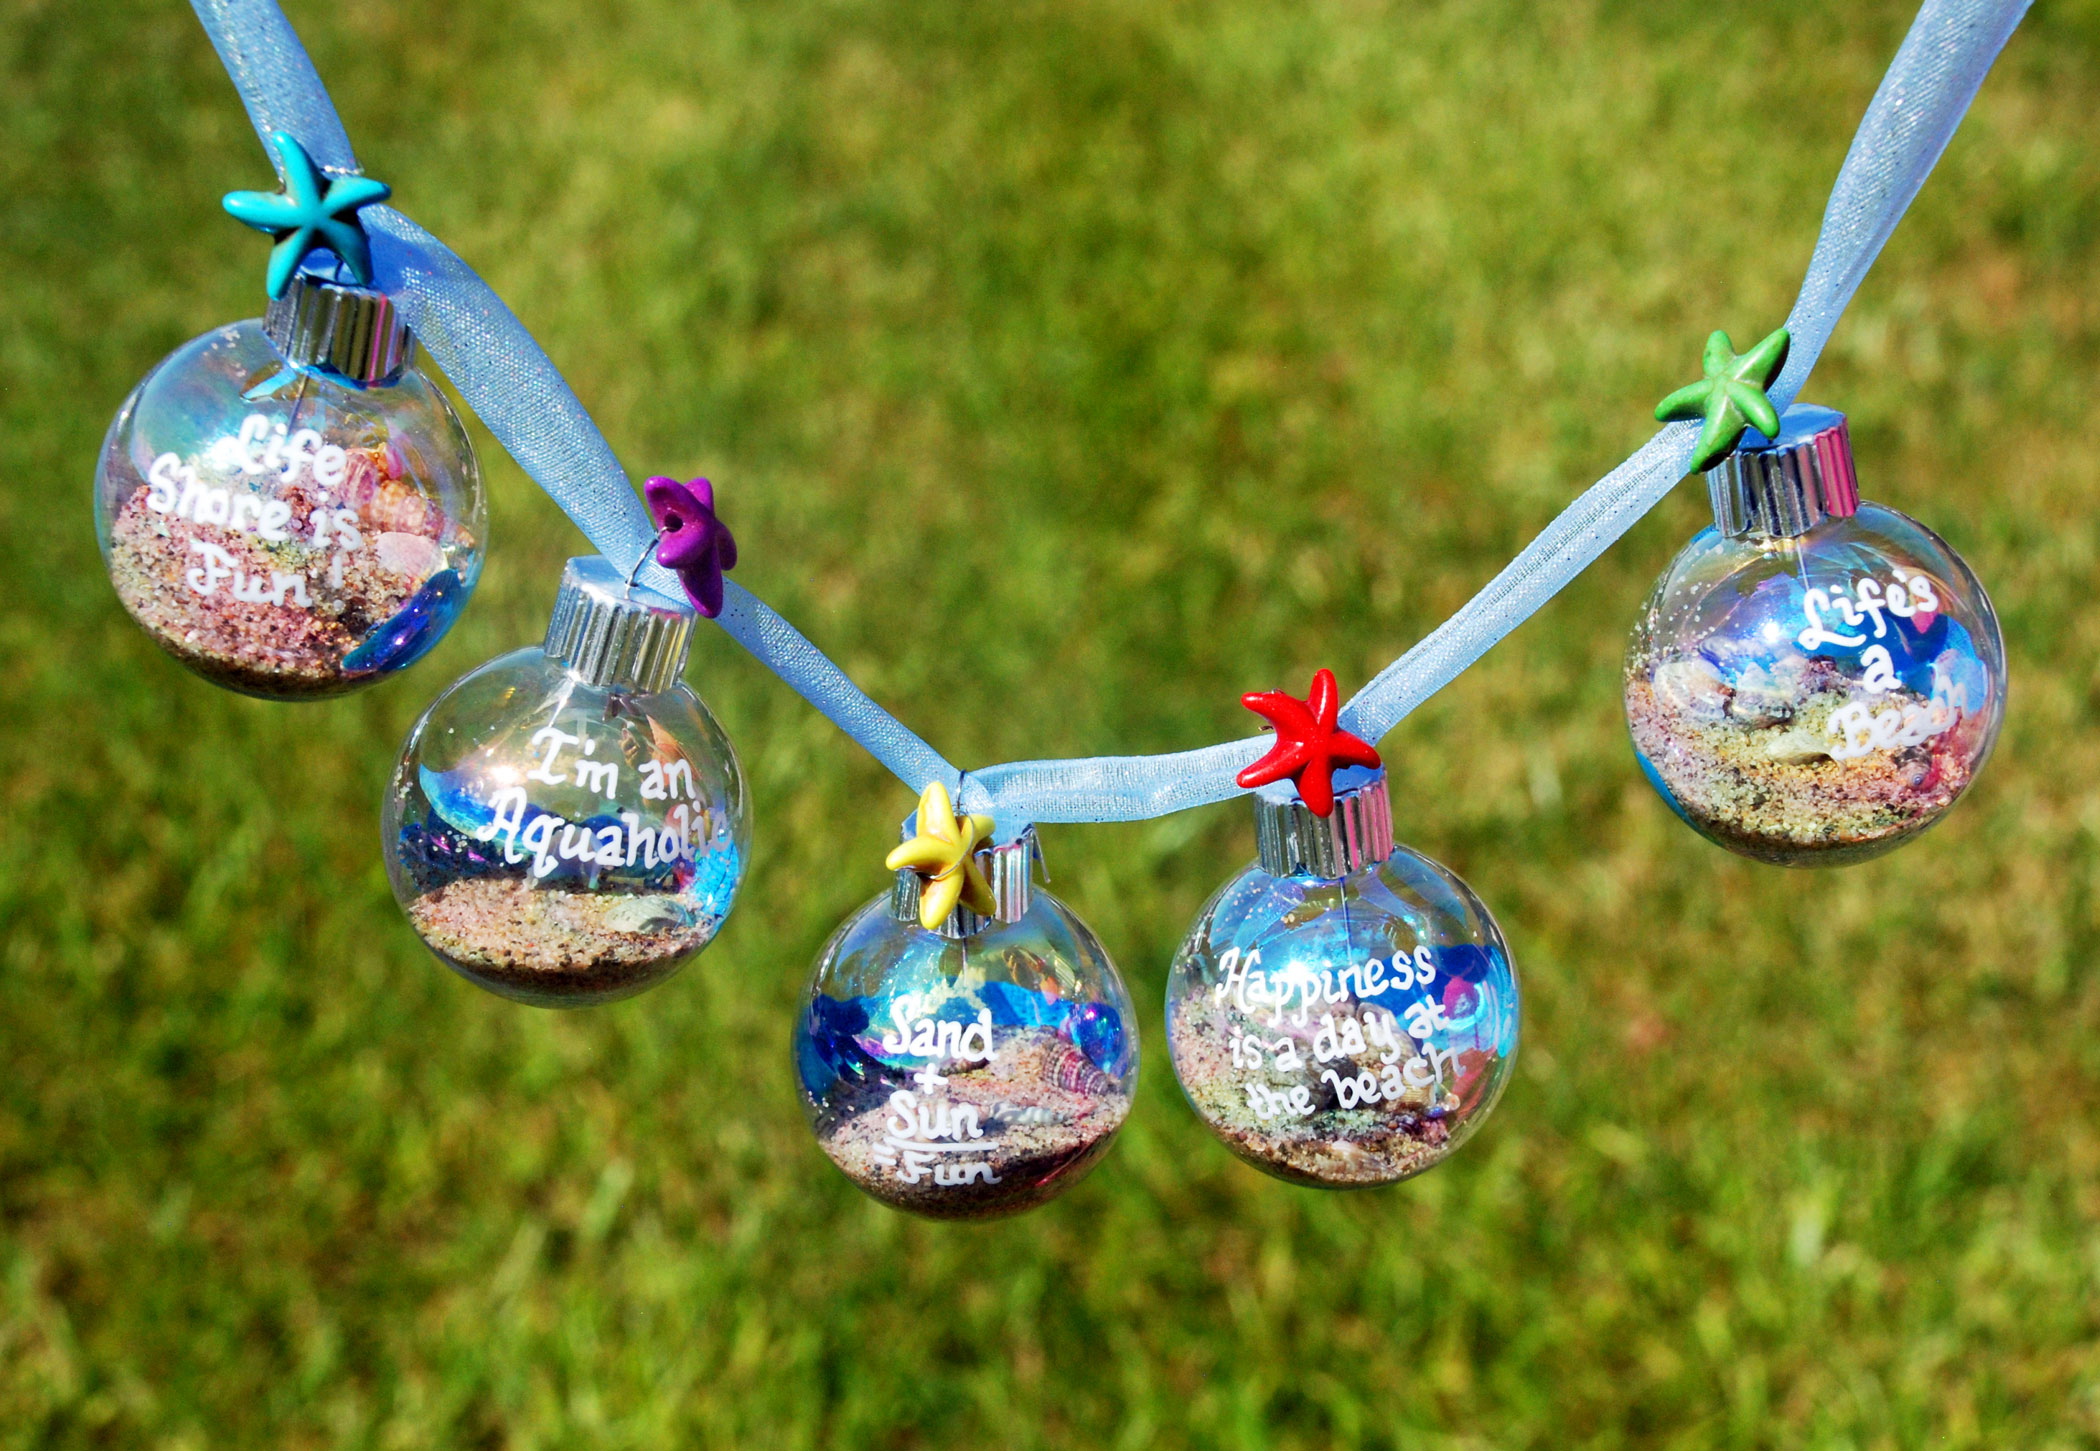 Christmas in July garland made of baubles with beach themes. | OrnamentShop.com 